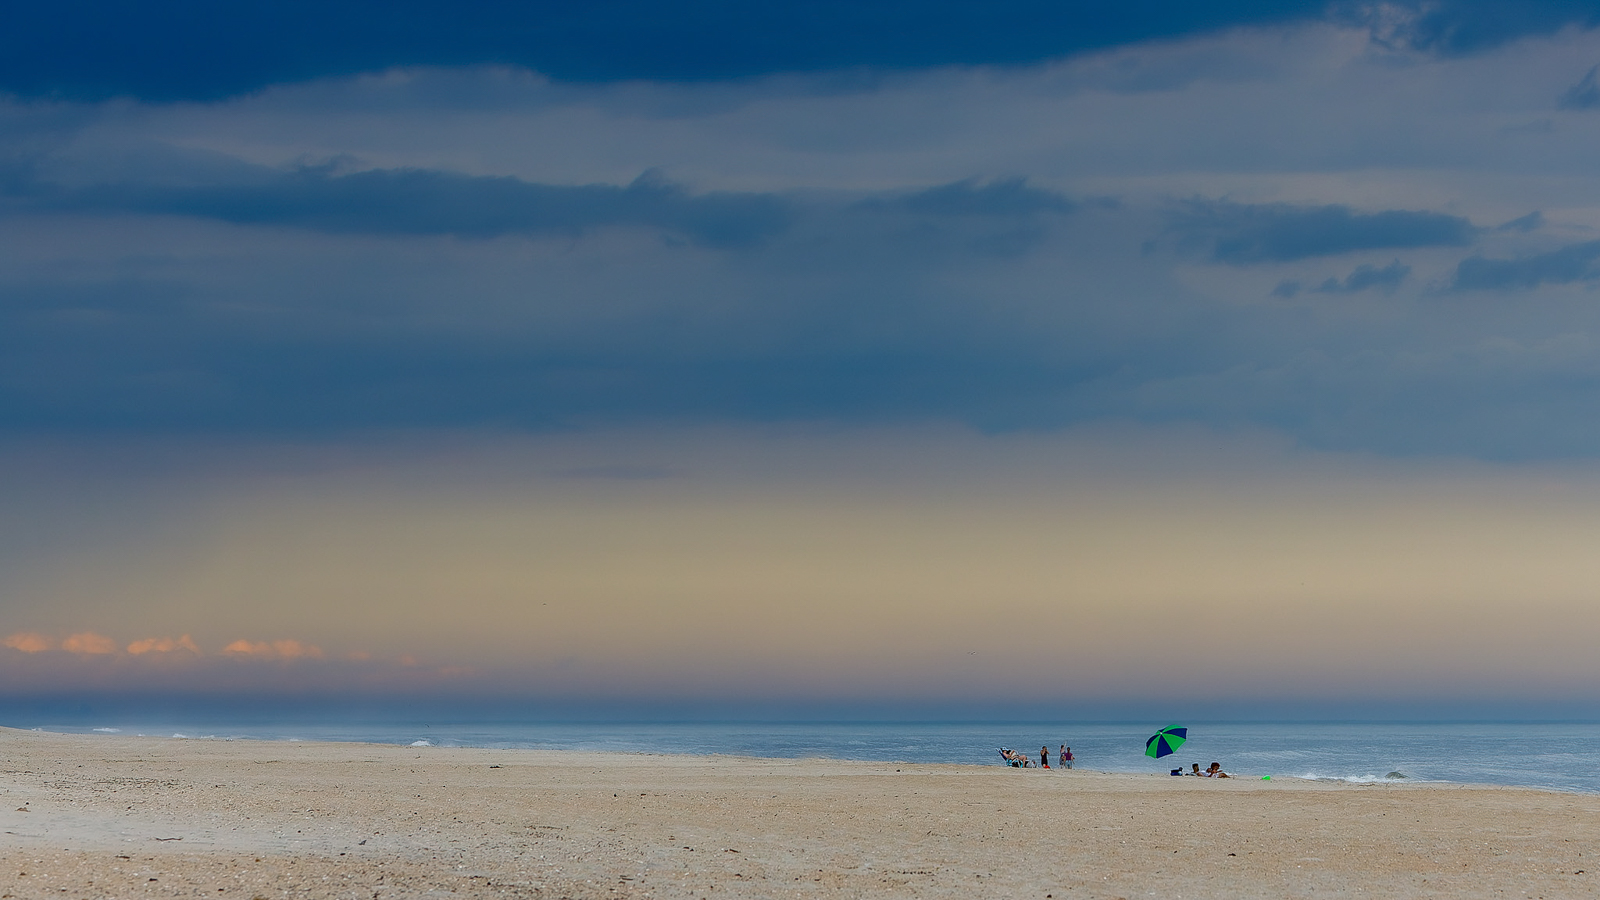 2021_05_Assateague-12774-2-CR3_DxO_DeepPRIME-Edit2048.jpg - Late in the afternoon we watched the ominous storm clouds roll in.  Pretty soon the shore was almost deserted except for these two groups of beach goers.  Not long after this picture was taken the rain came down in buckets!